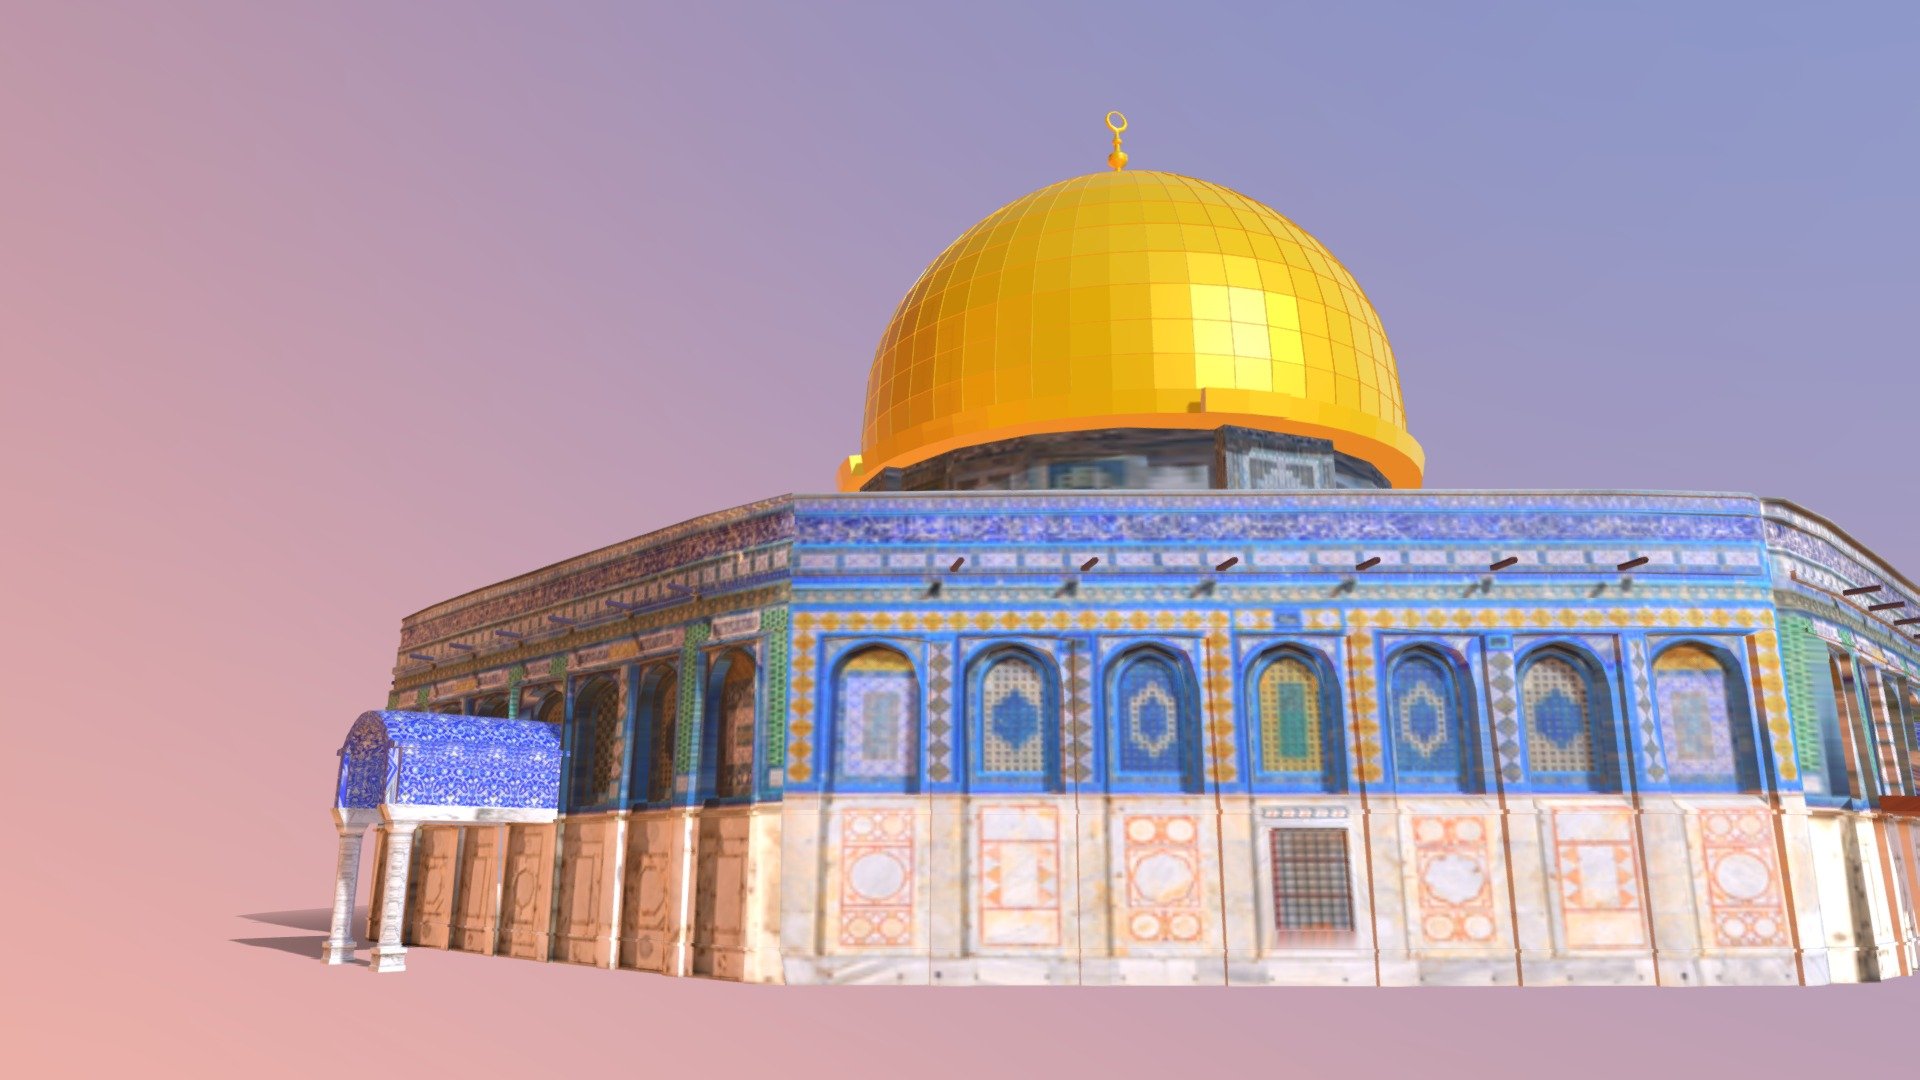 It's been a good minute since I uploaded anything here! 
I'm gonna upload a few architechtual things I made in Fall for a class. This was the first time I modeled and textured a building. It's really messy and I was under a time constraint, but I still like it c: - Dome of the Rock - 3D model by glittermocha 3d model